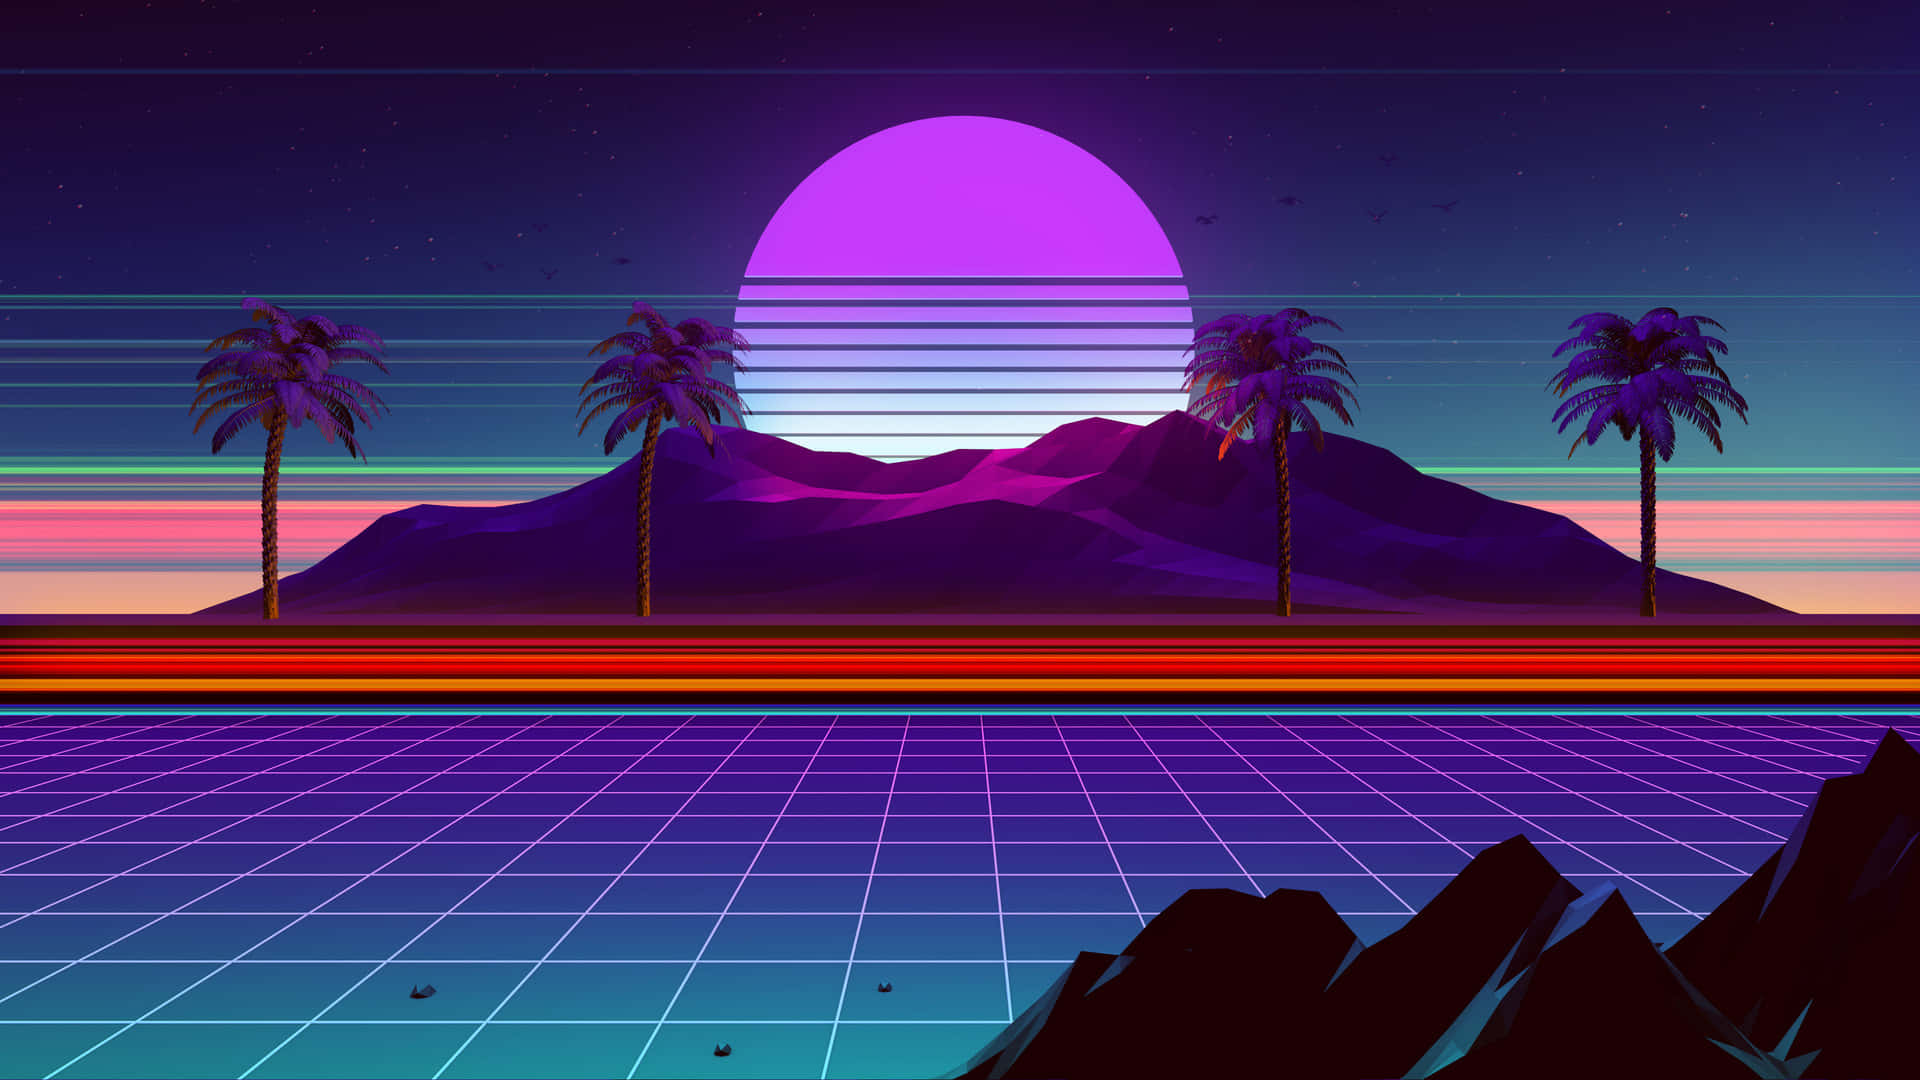 Take your experience to the next level with Vaporwave Tablet Wallpaper